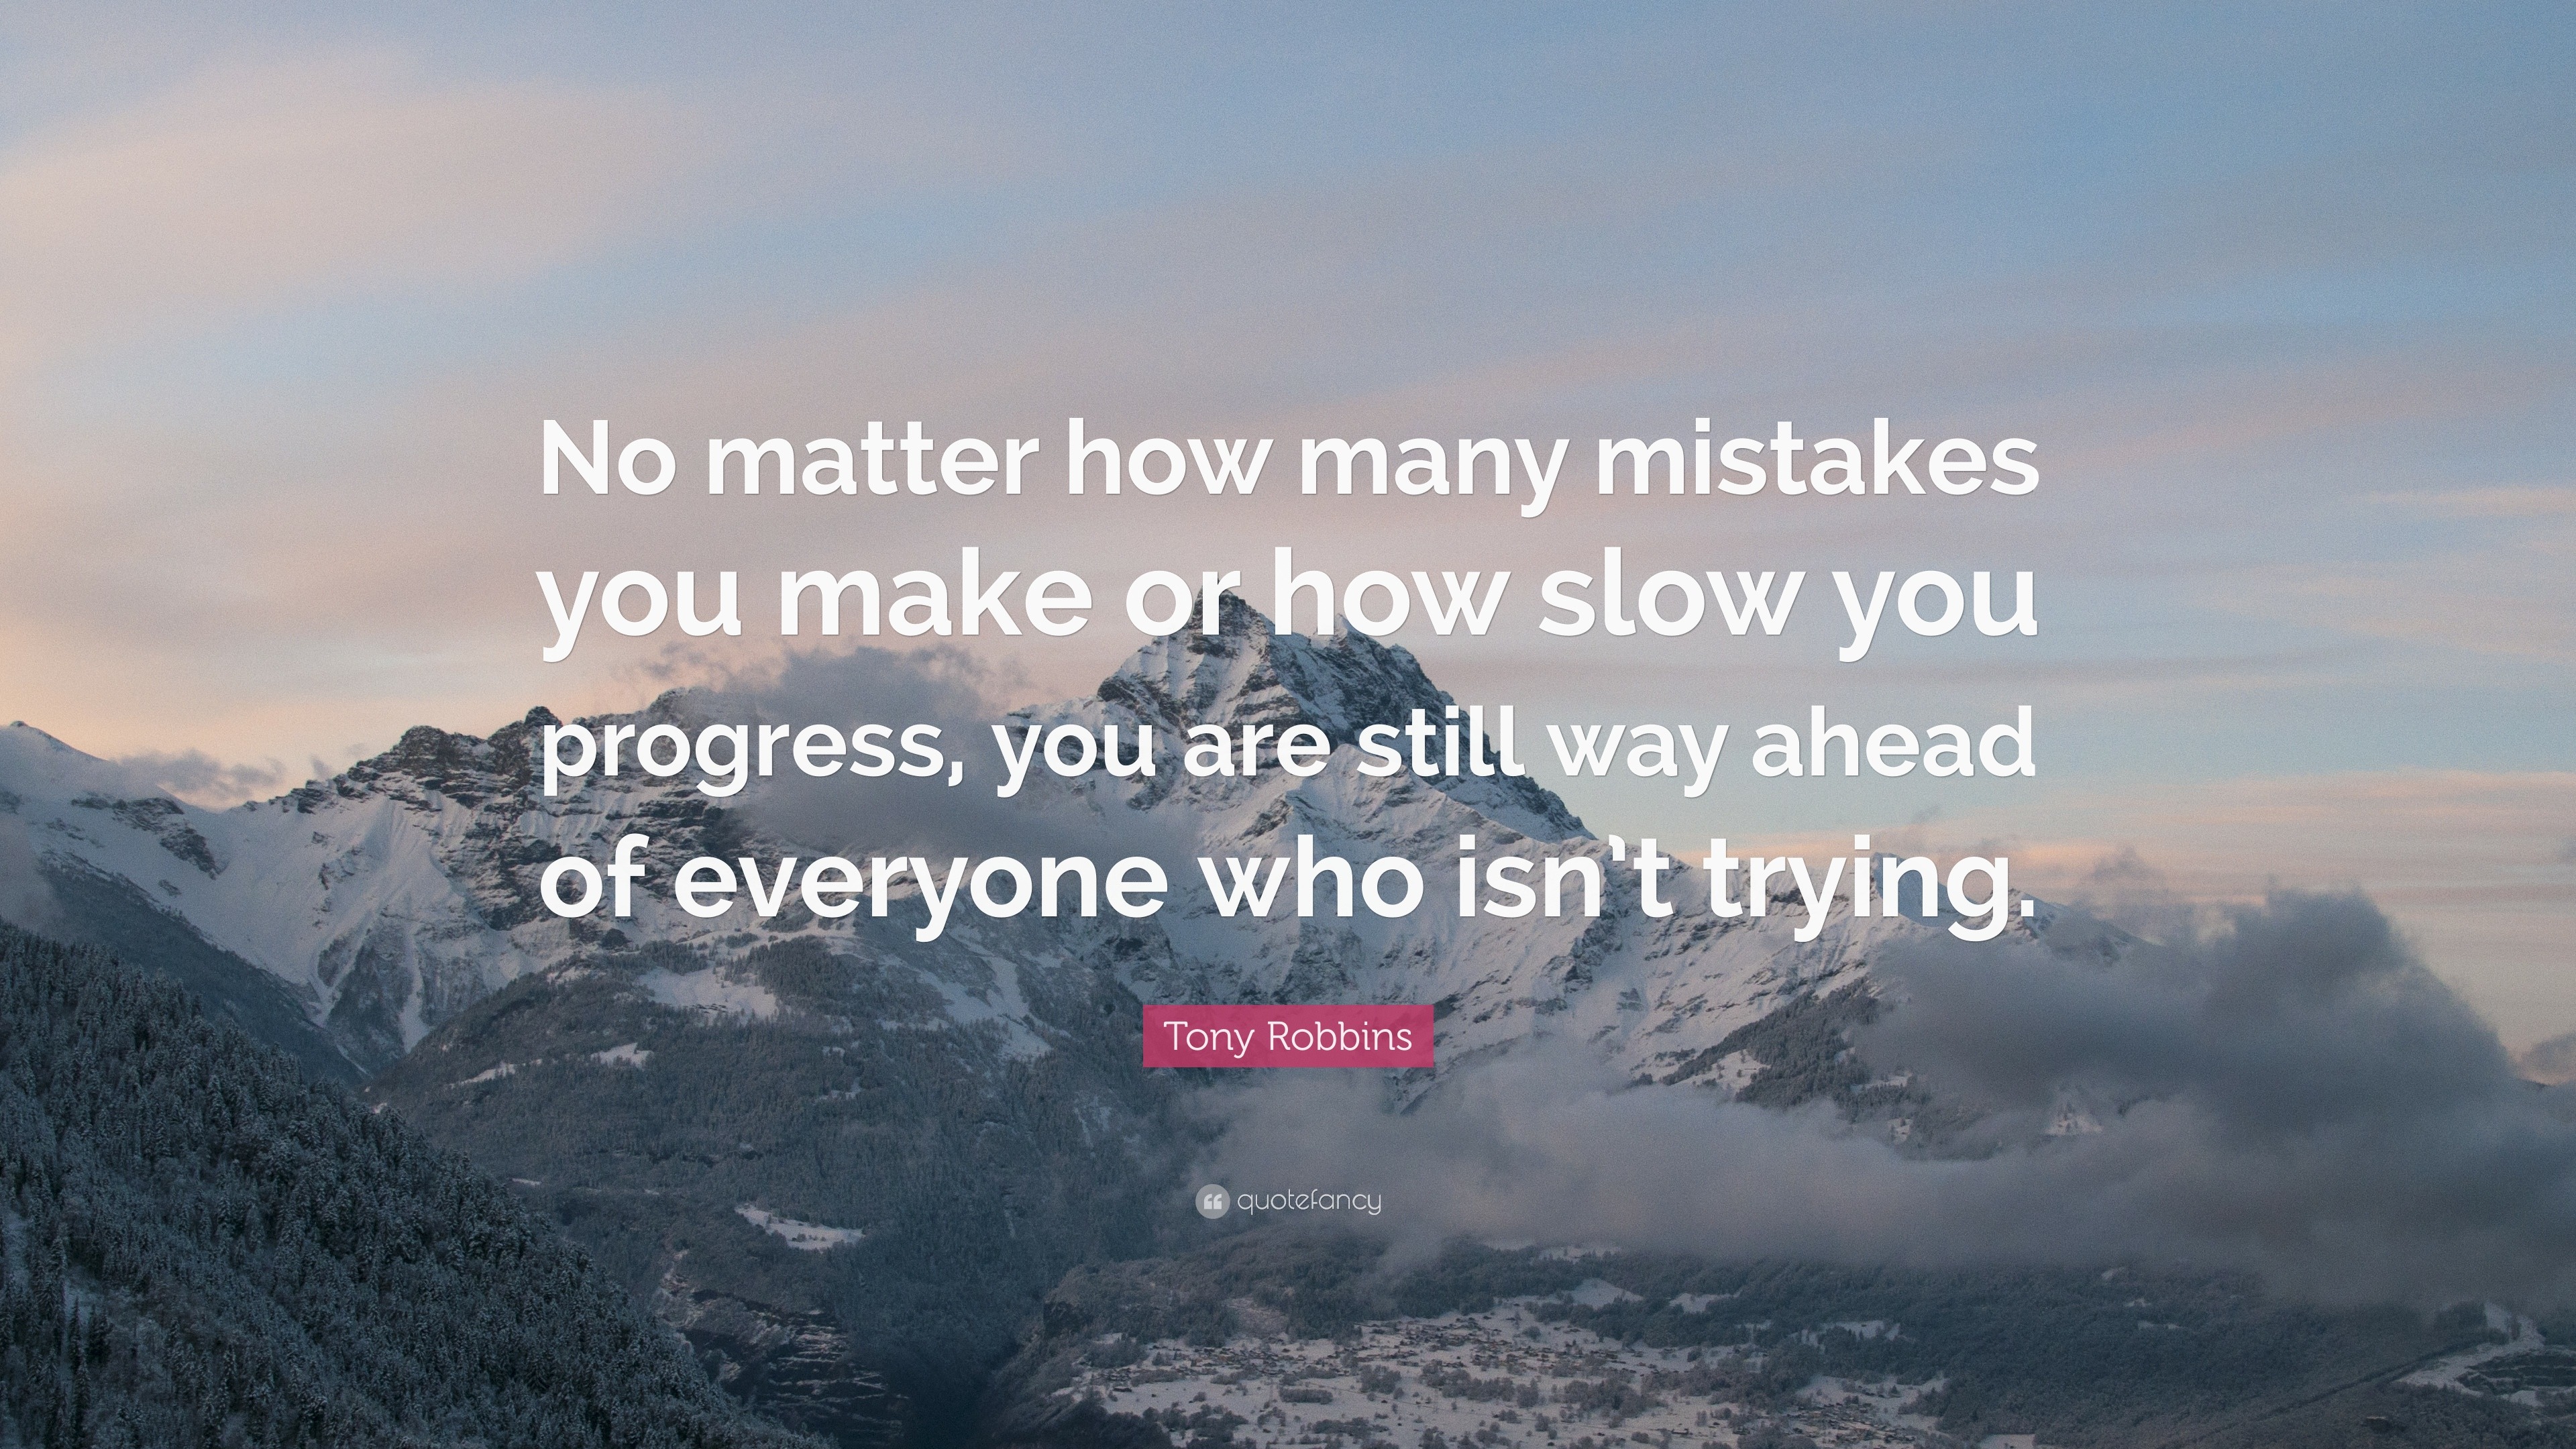 quotes about change and mistakes